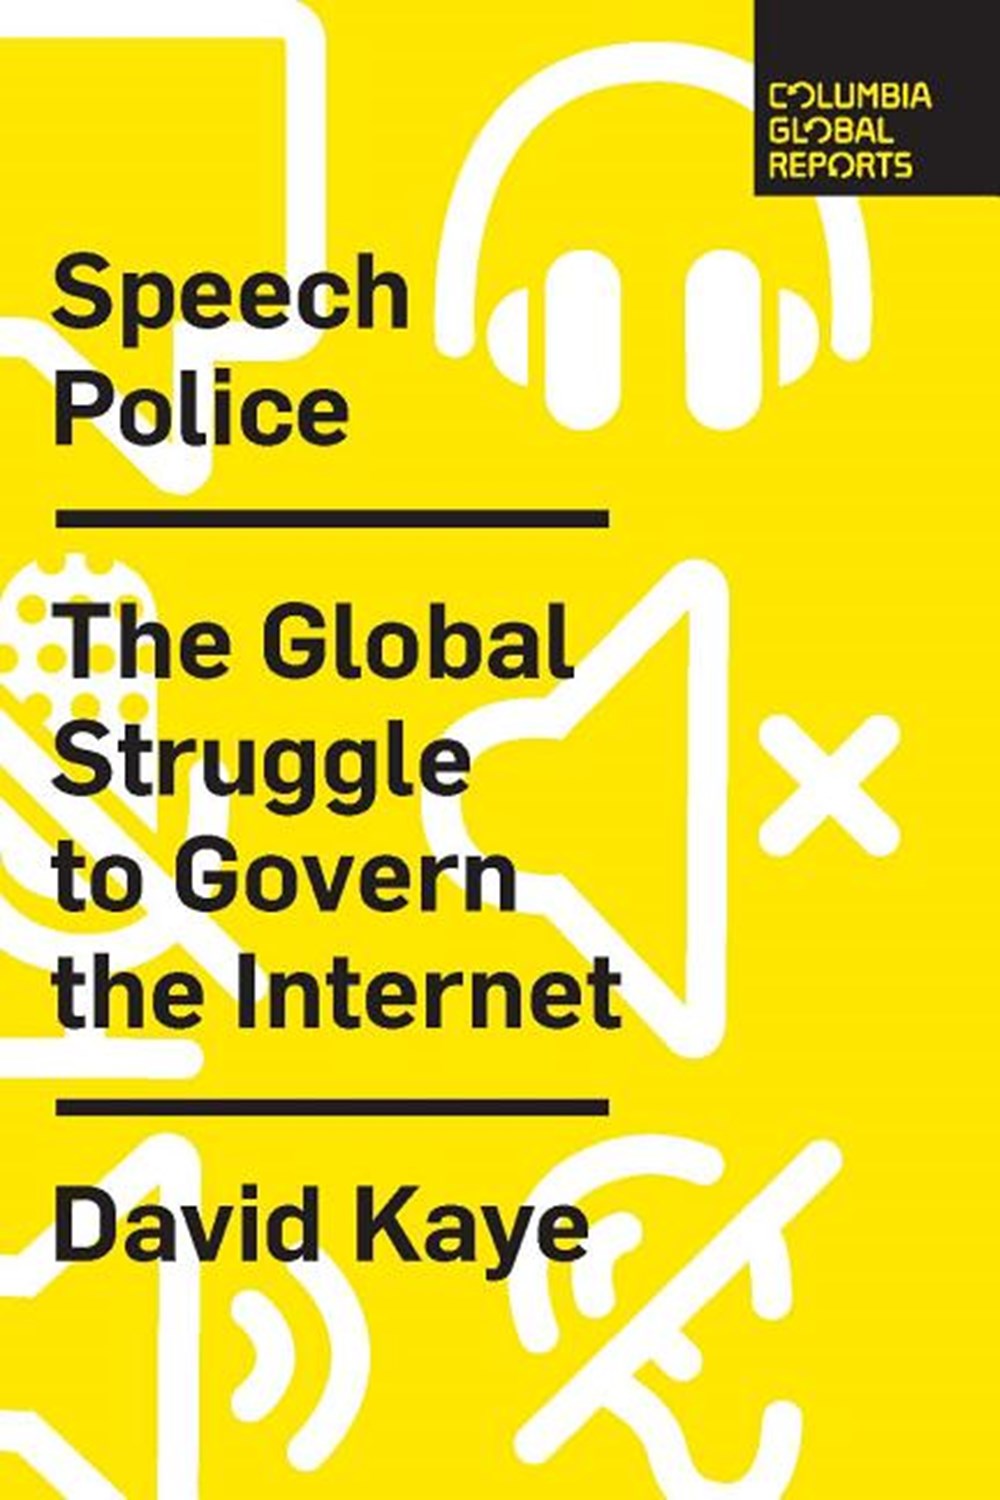 Speech Police The Global Struggle to Govern the Internet